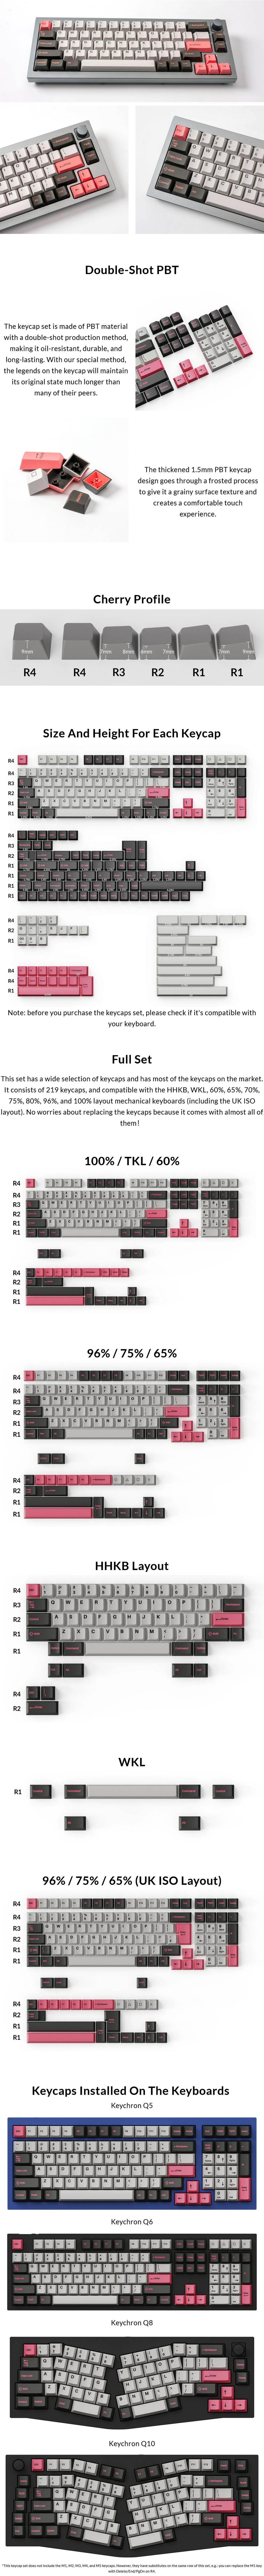 A large marketing image providing additional information about the product Keychron Dolch Pink - Cherry Profile Double Shot PBT Full Keycap Set 219pcs - Additional alt info not provided